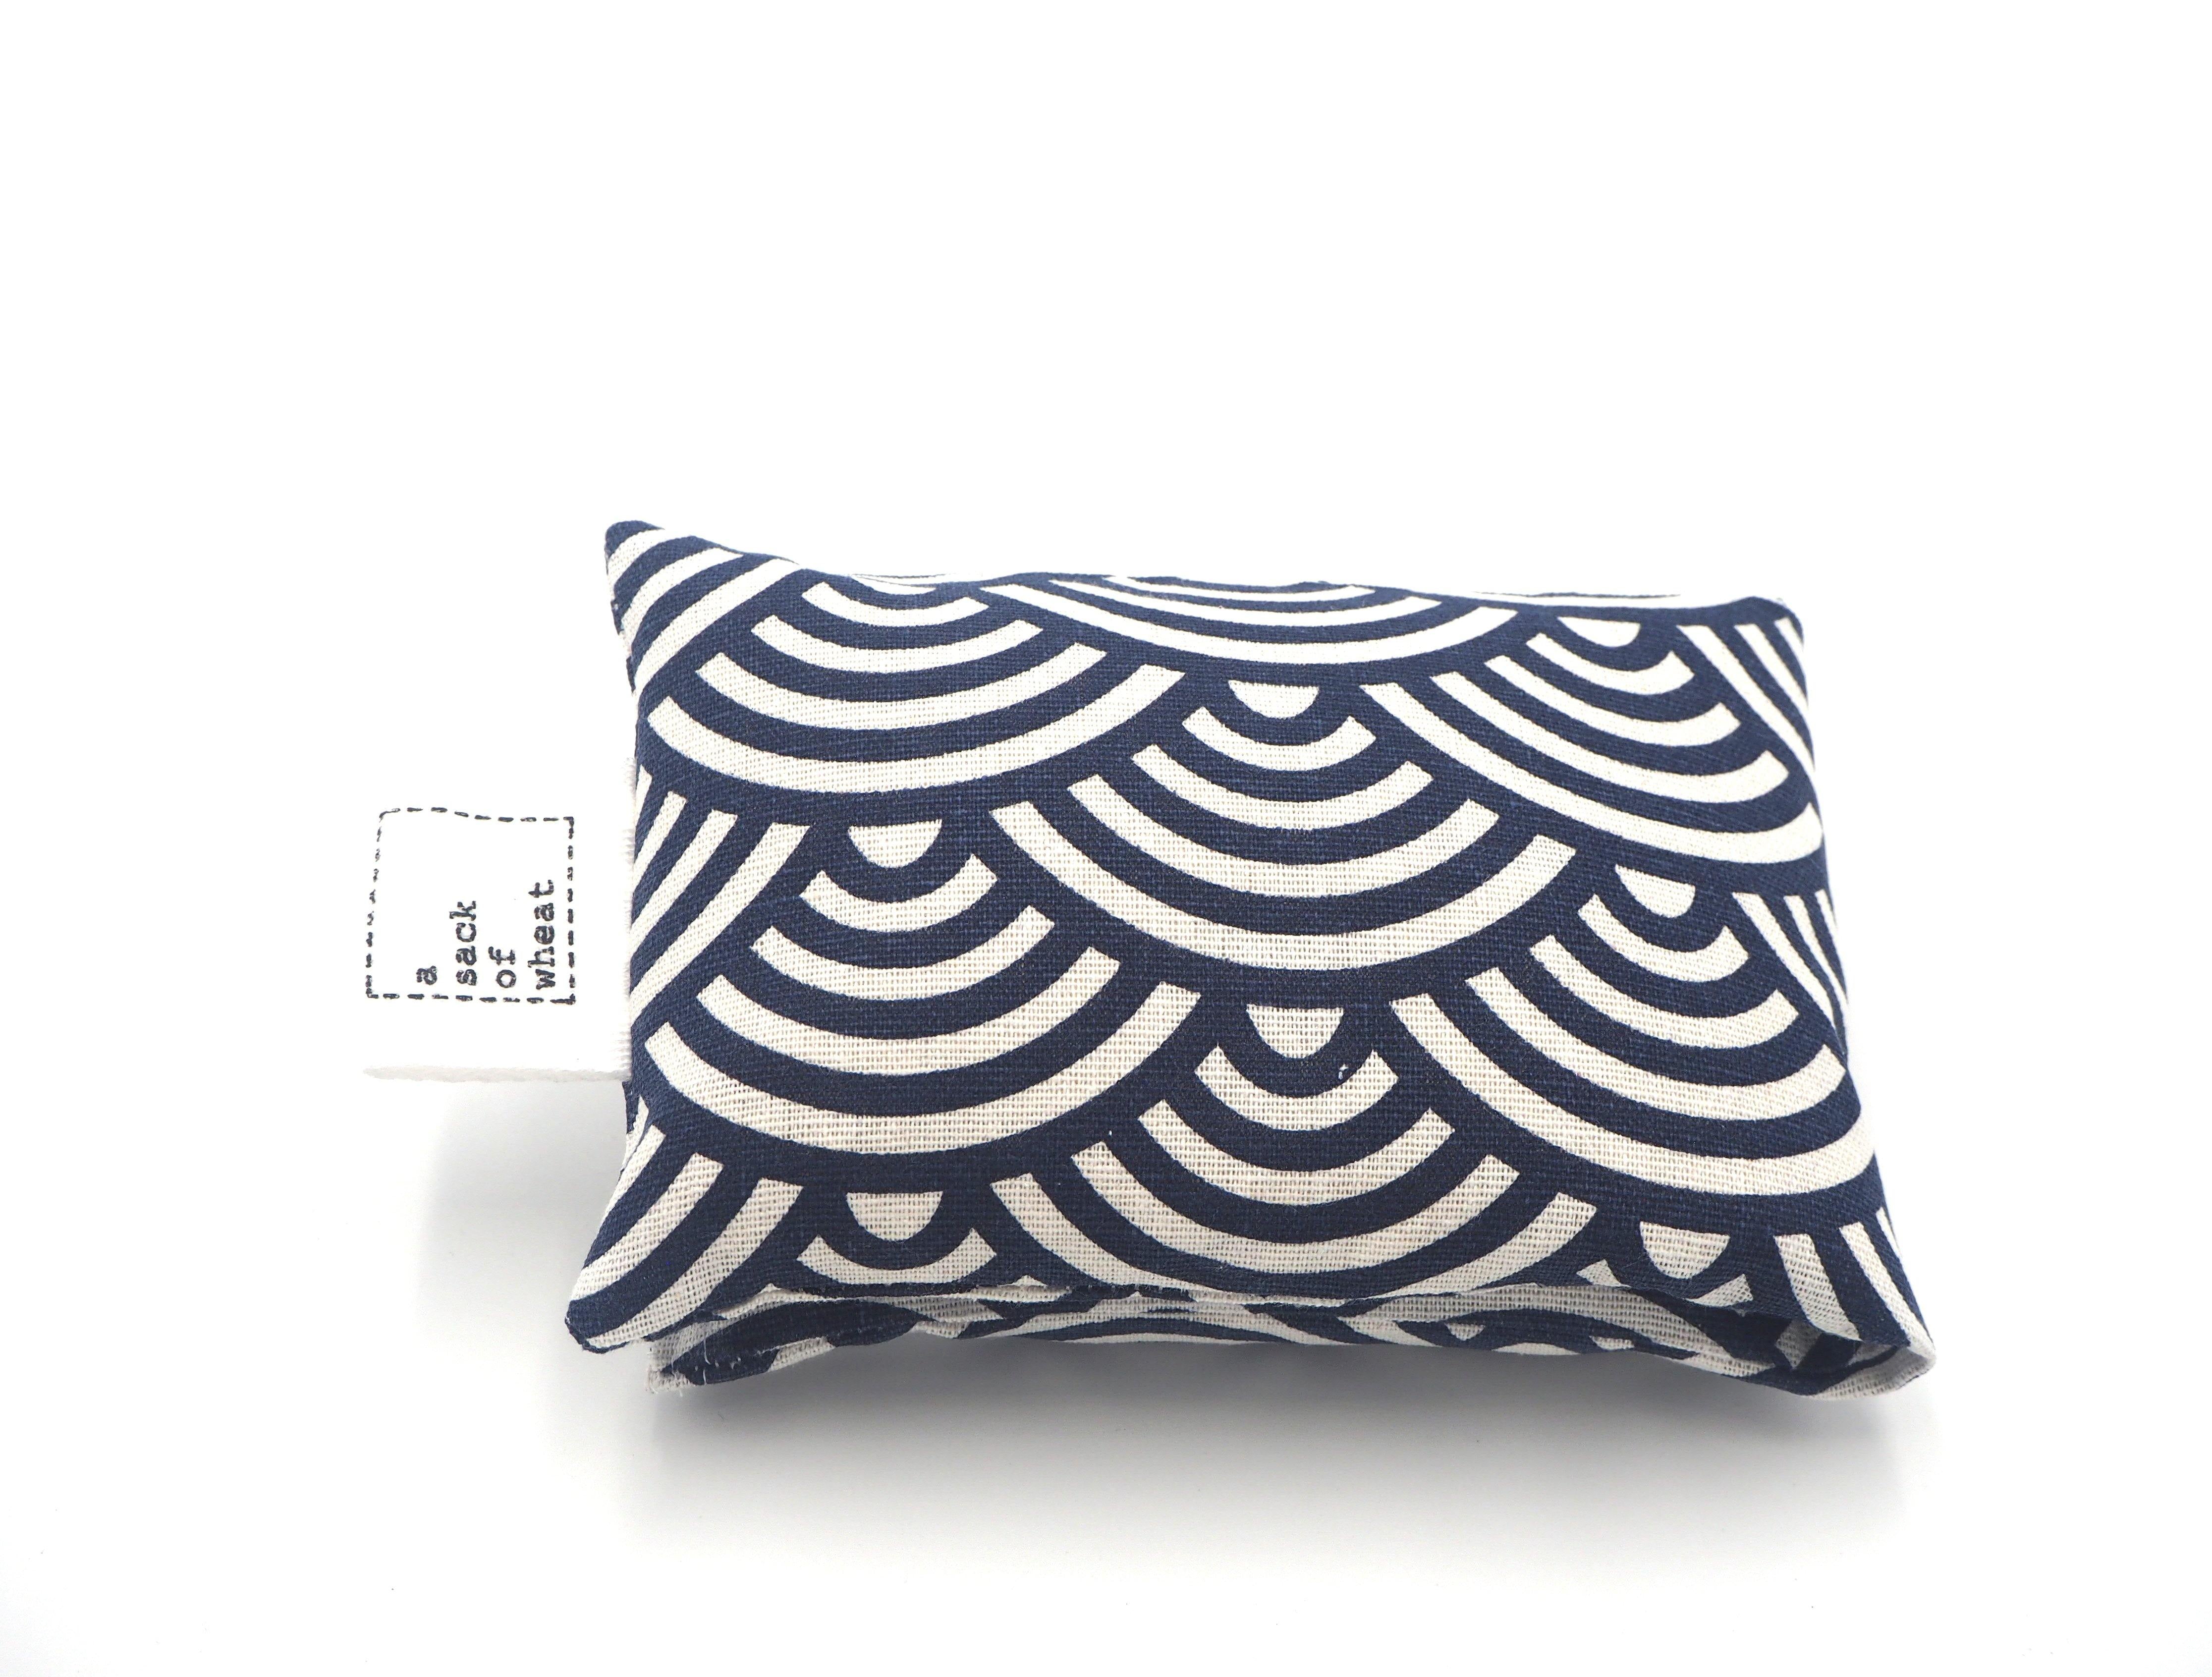 Folded view of A Sack Of Wheat, in a Classic Blue and White shell print, 100% cotton linen fabric